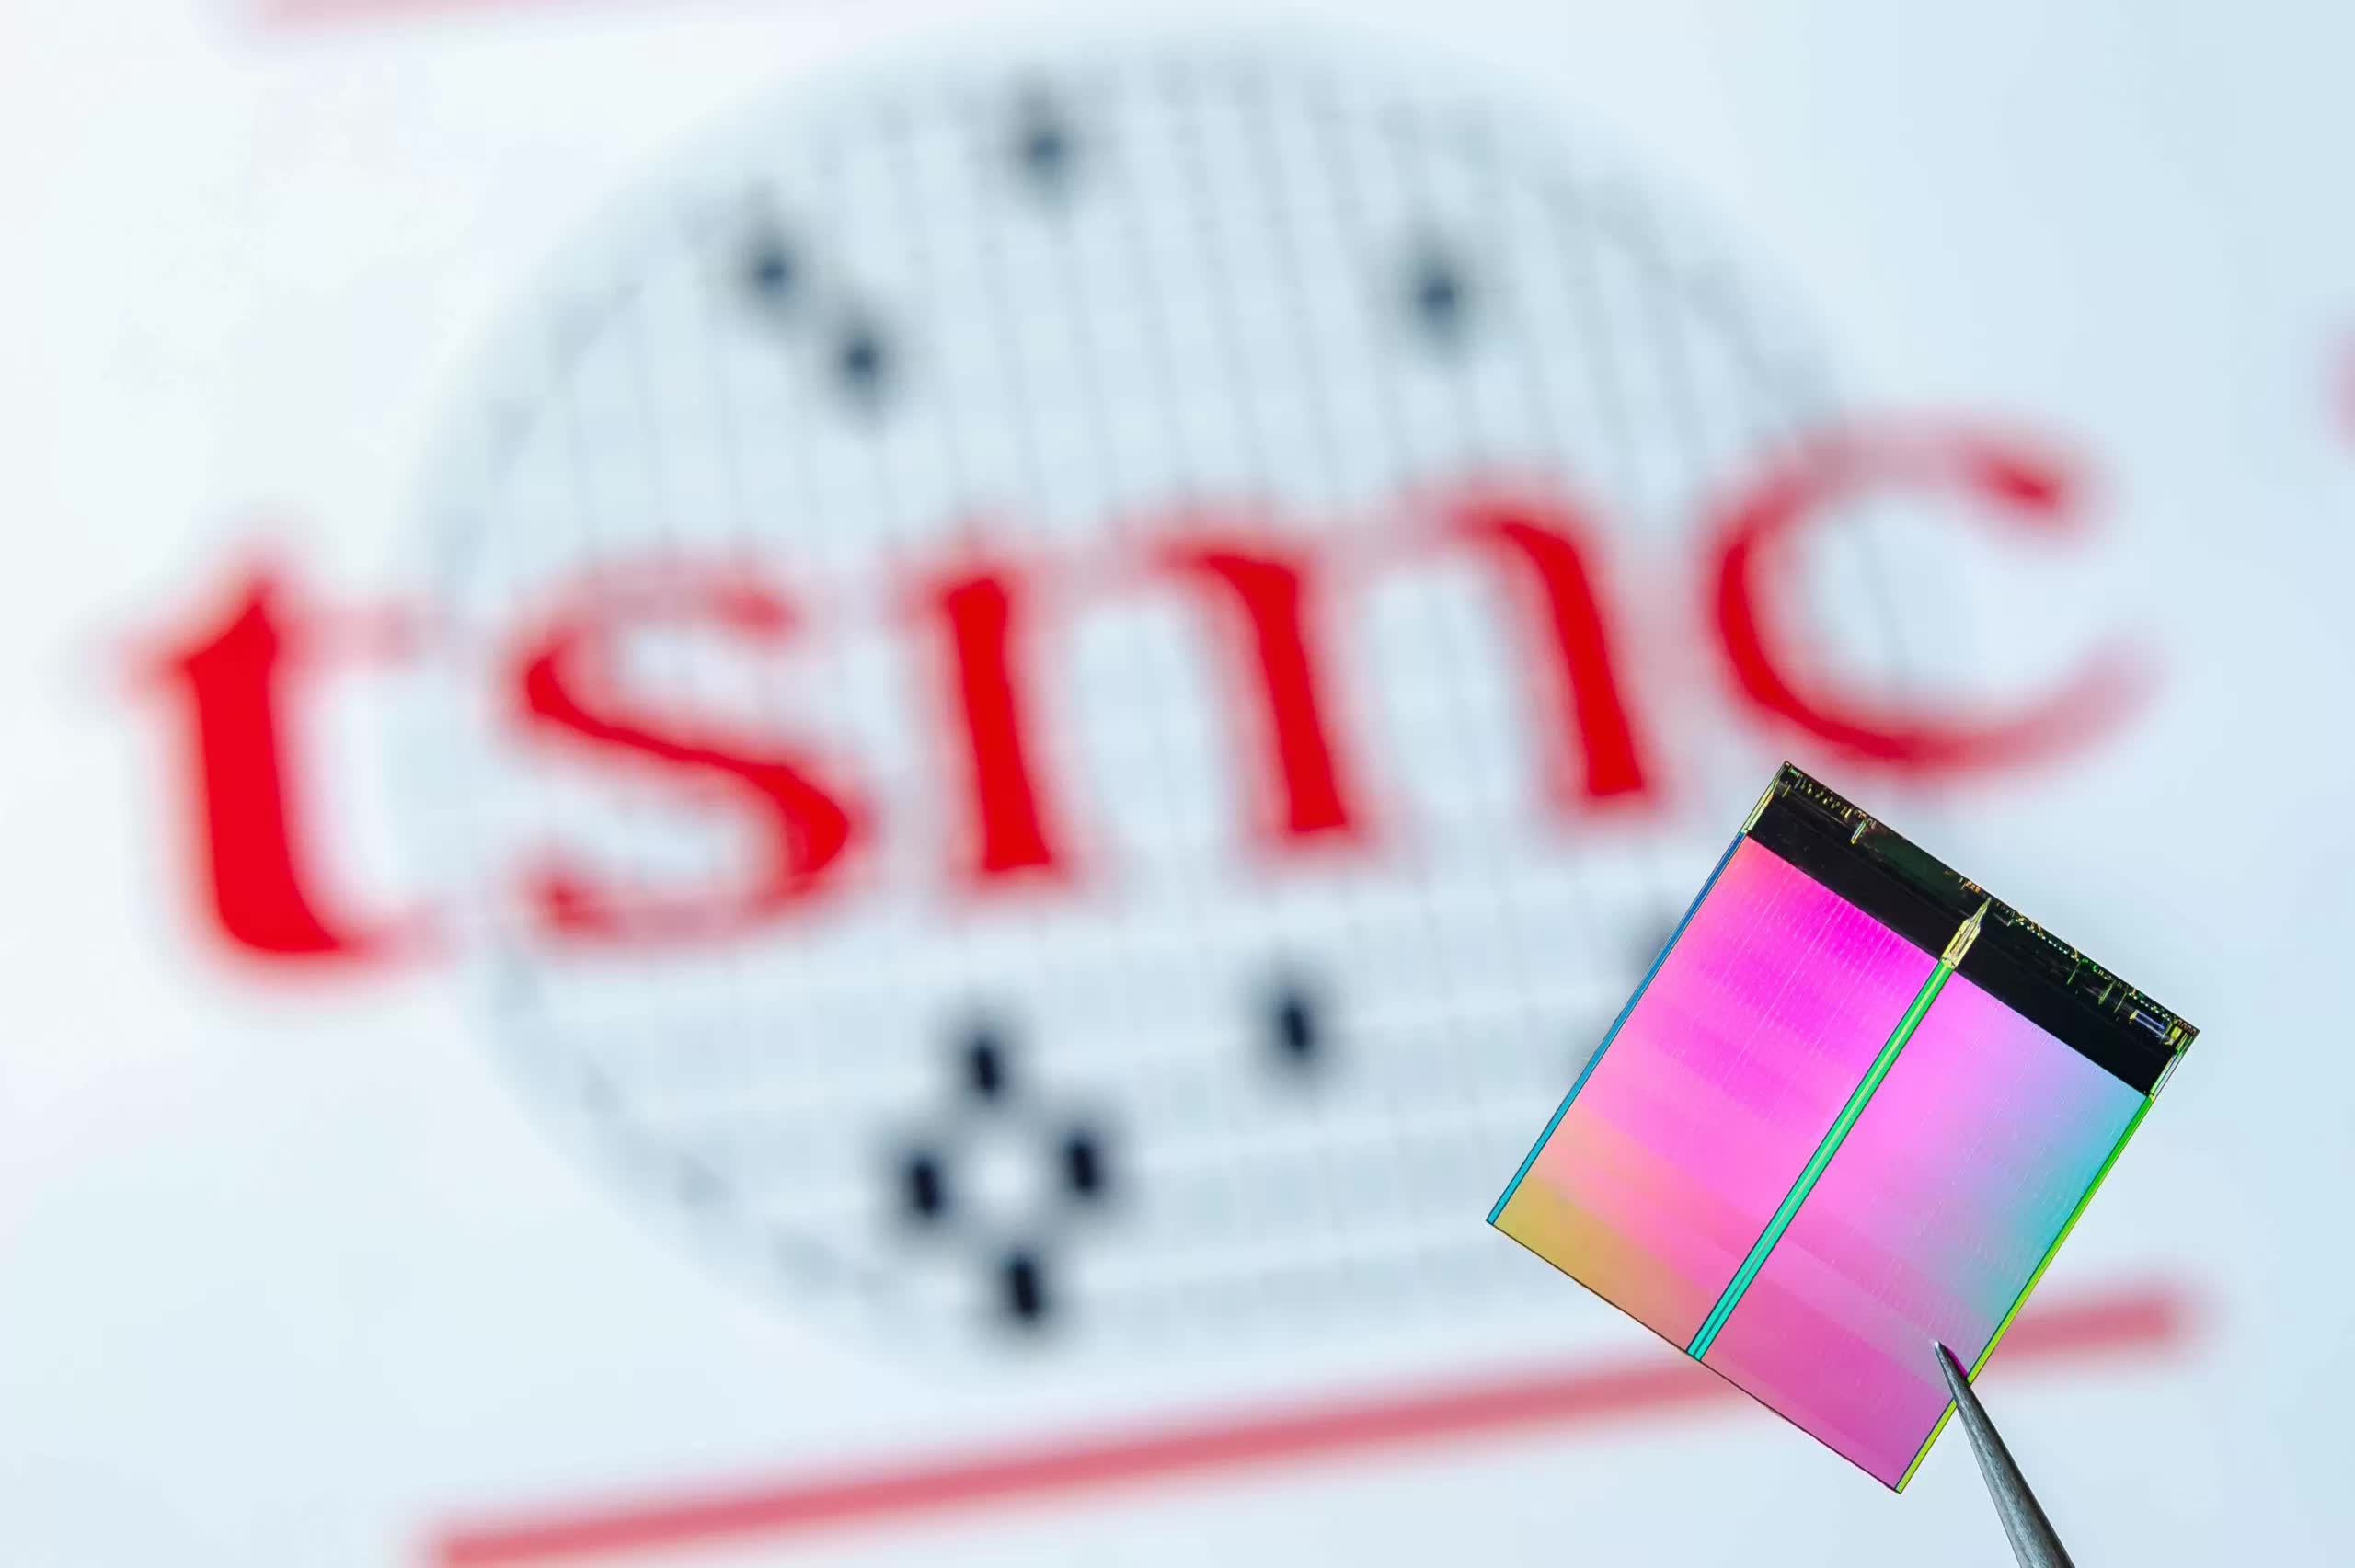 TSMC chairman warns of serious challenges to semiconductor industry posed by China tensions